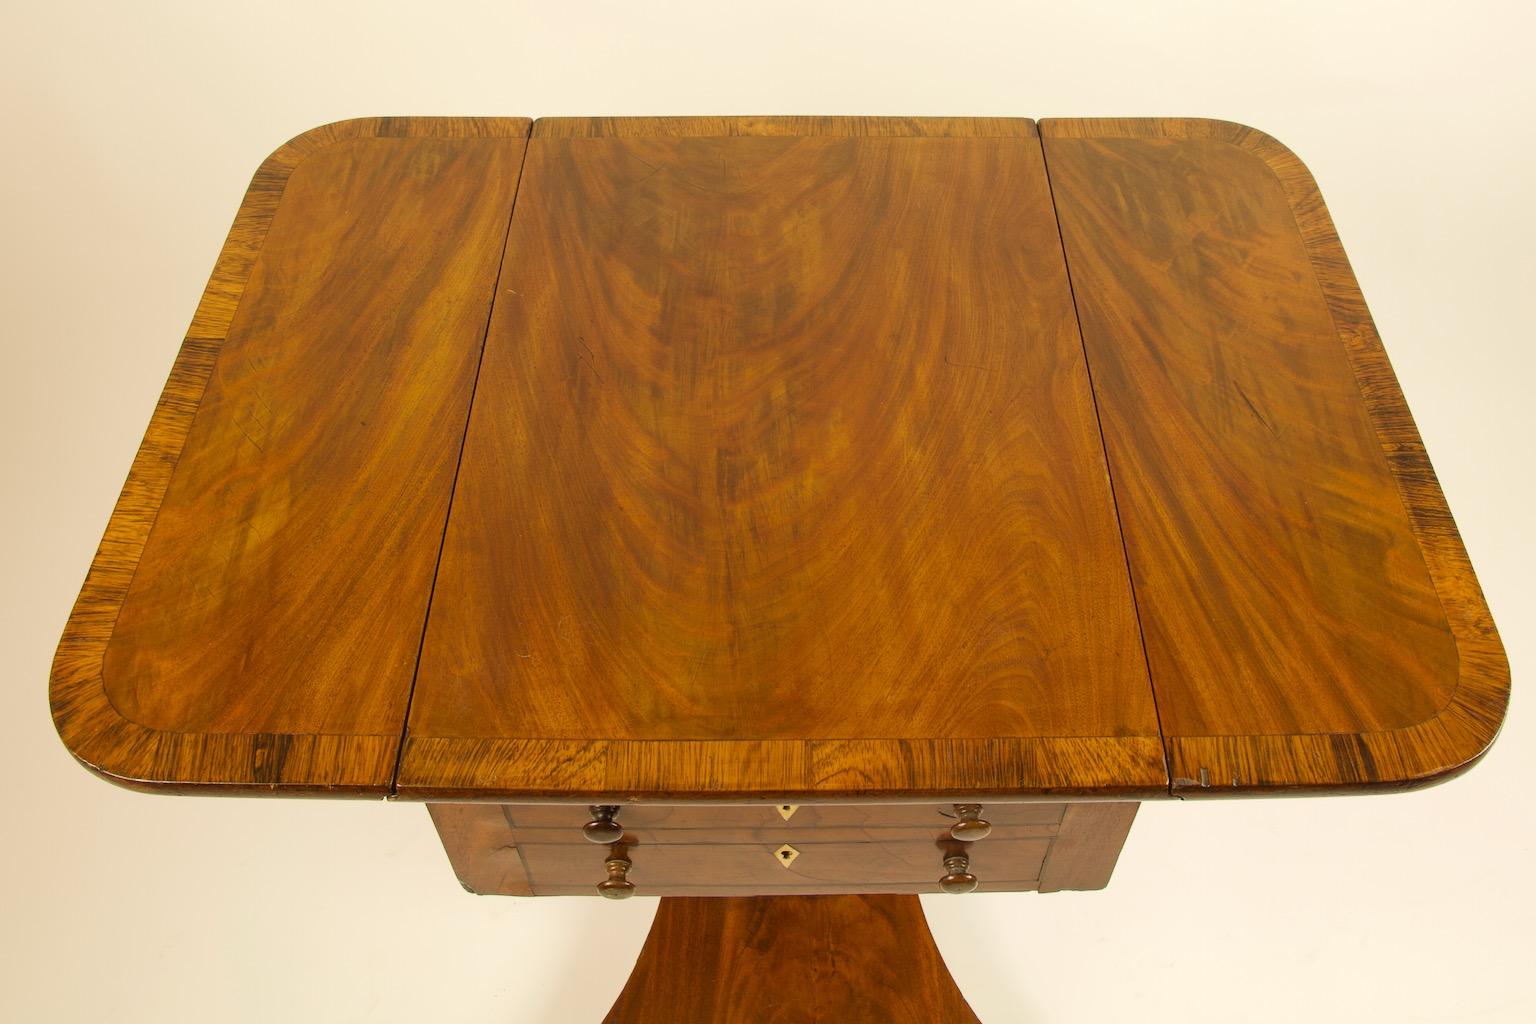 19th Century English Regency Mahogany Small Pembroke or Drop-Leaf Side Table For Sale 6